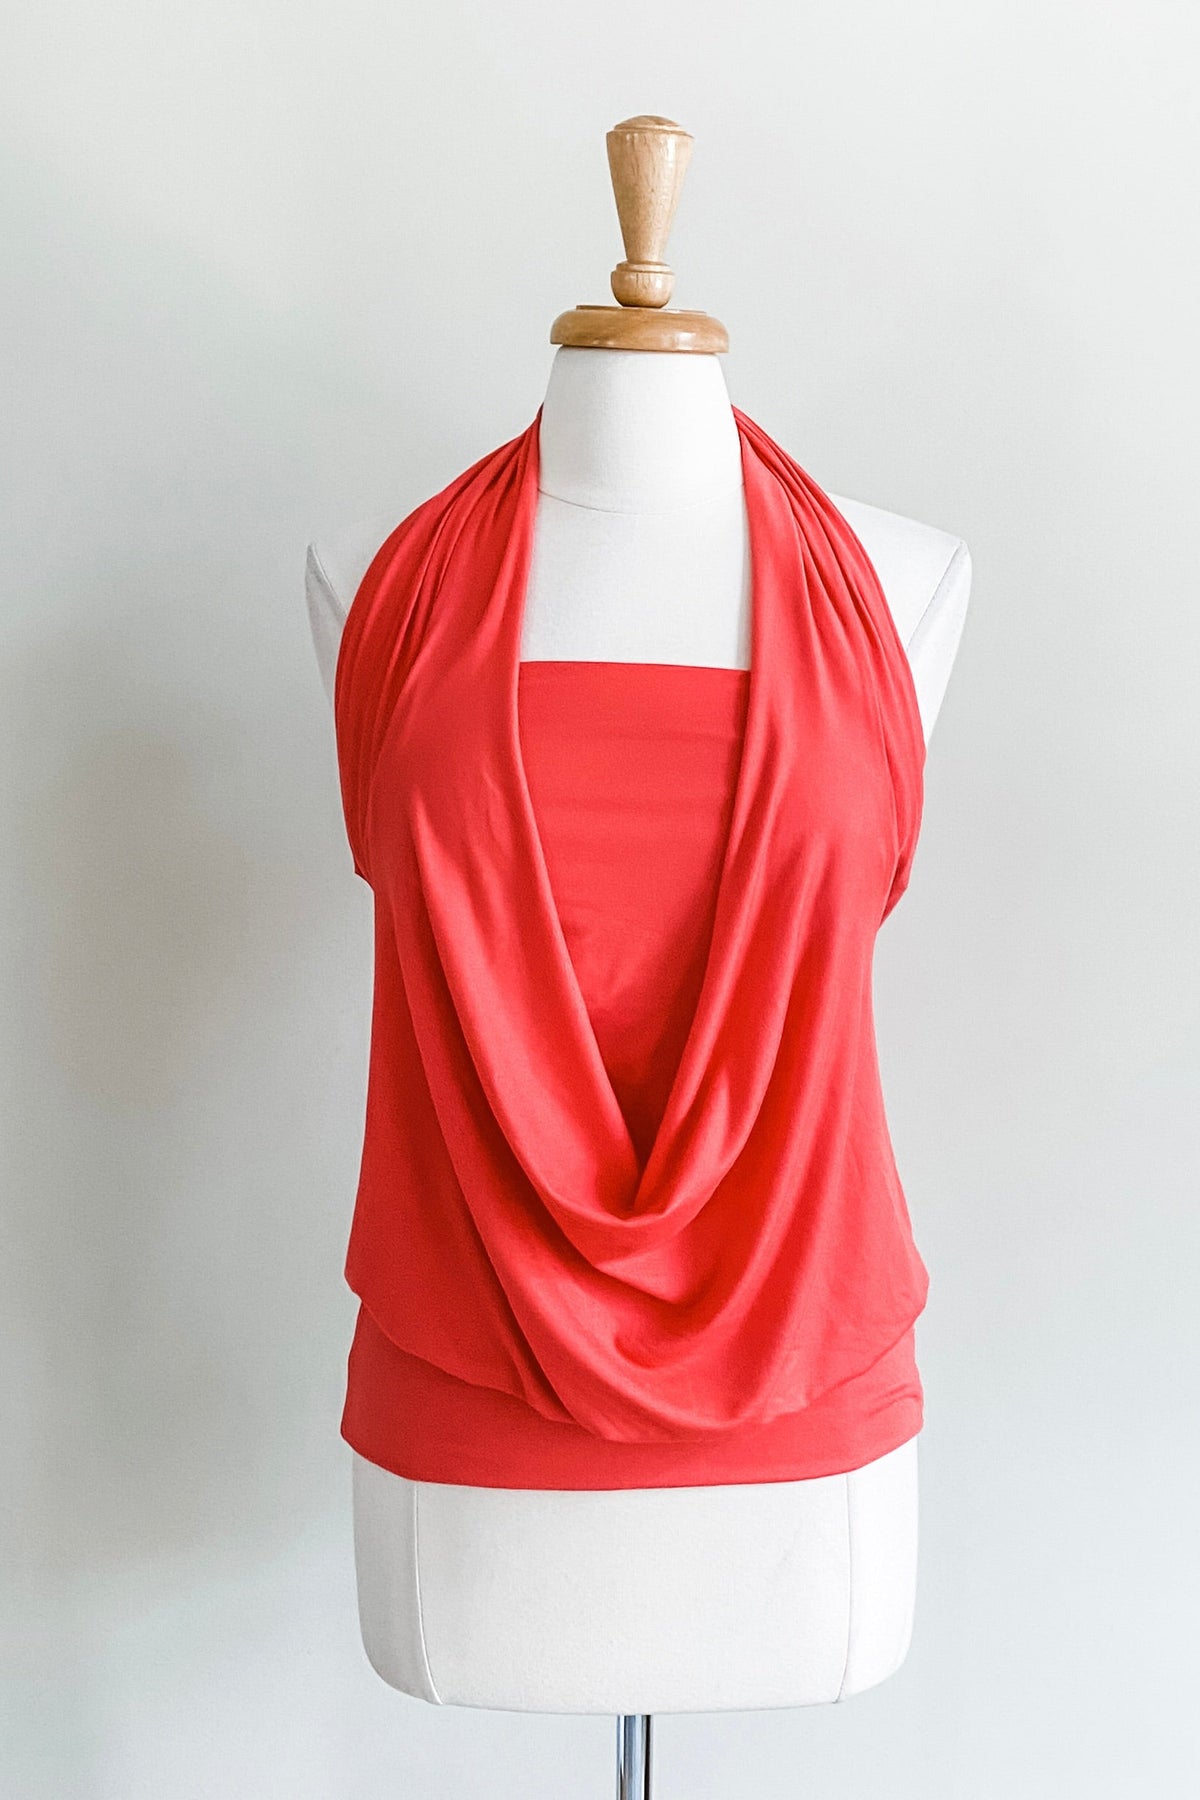 Diane Kroe One-4-All Top (Coral) - Warm Weather Capsule Collection